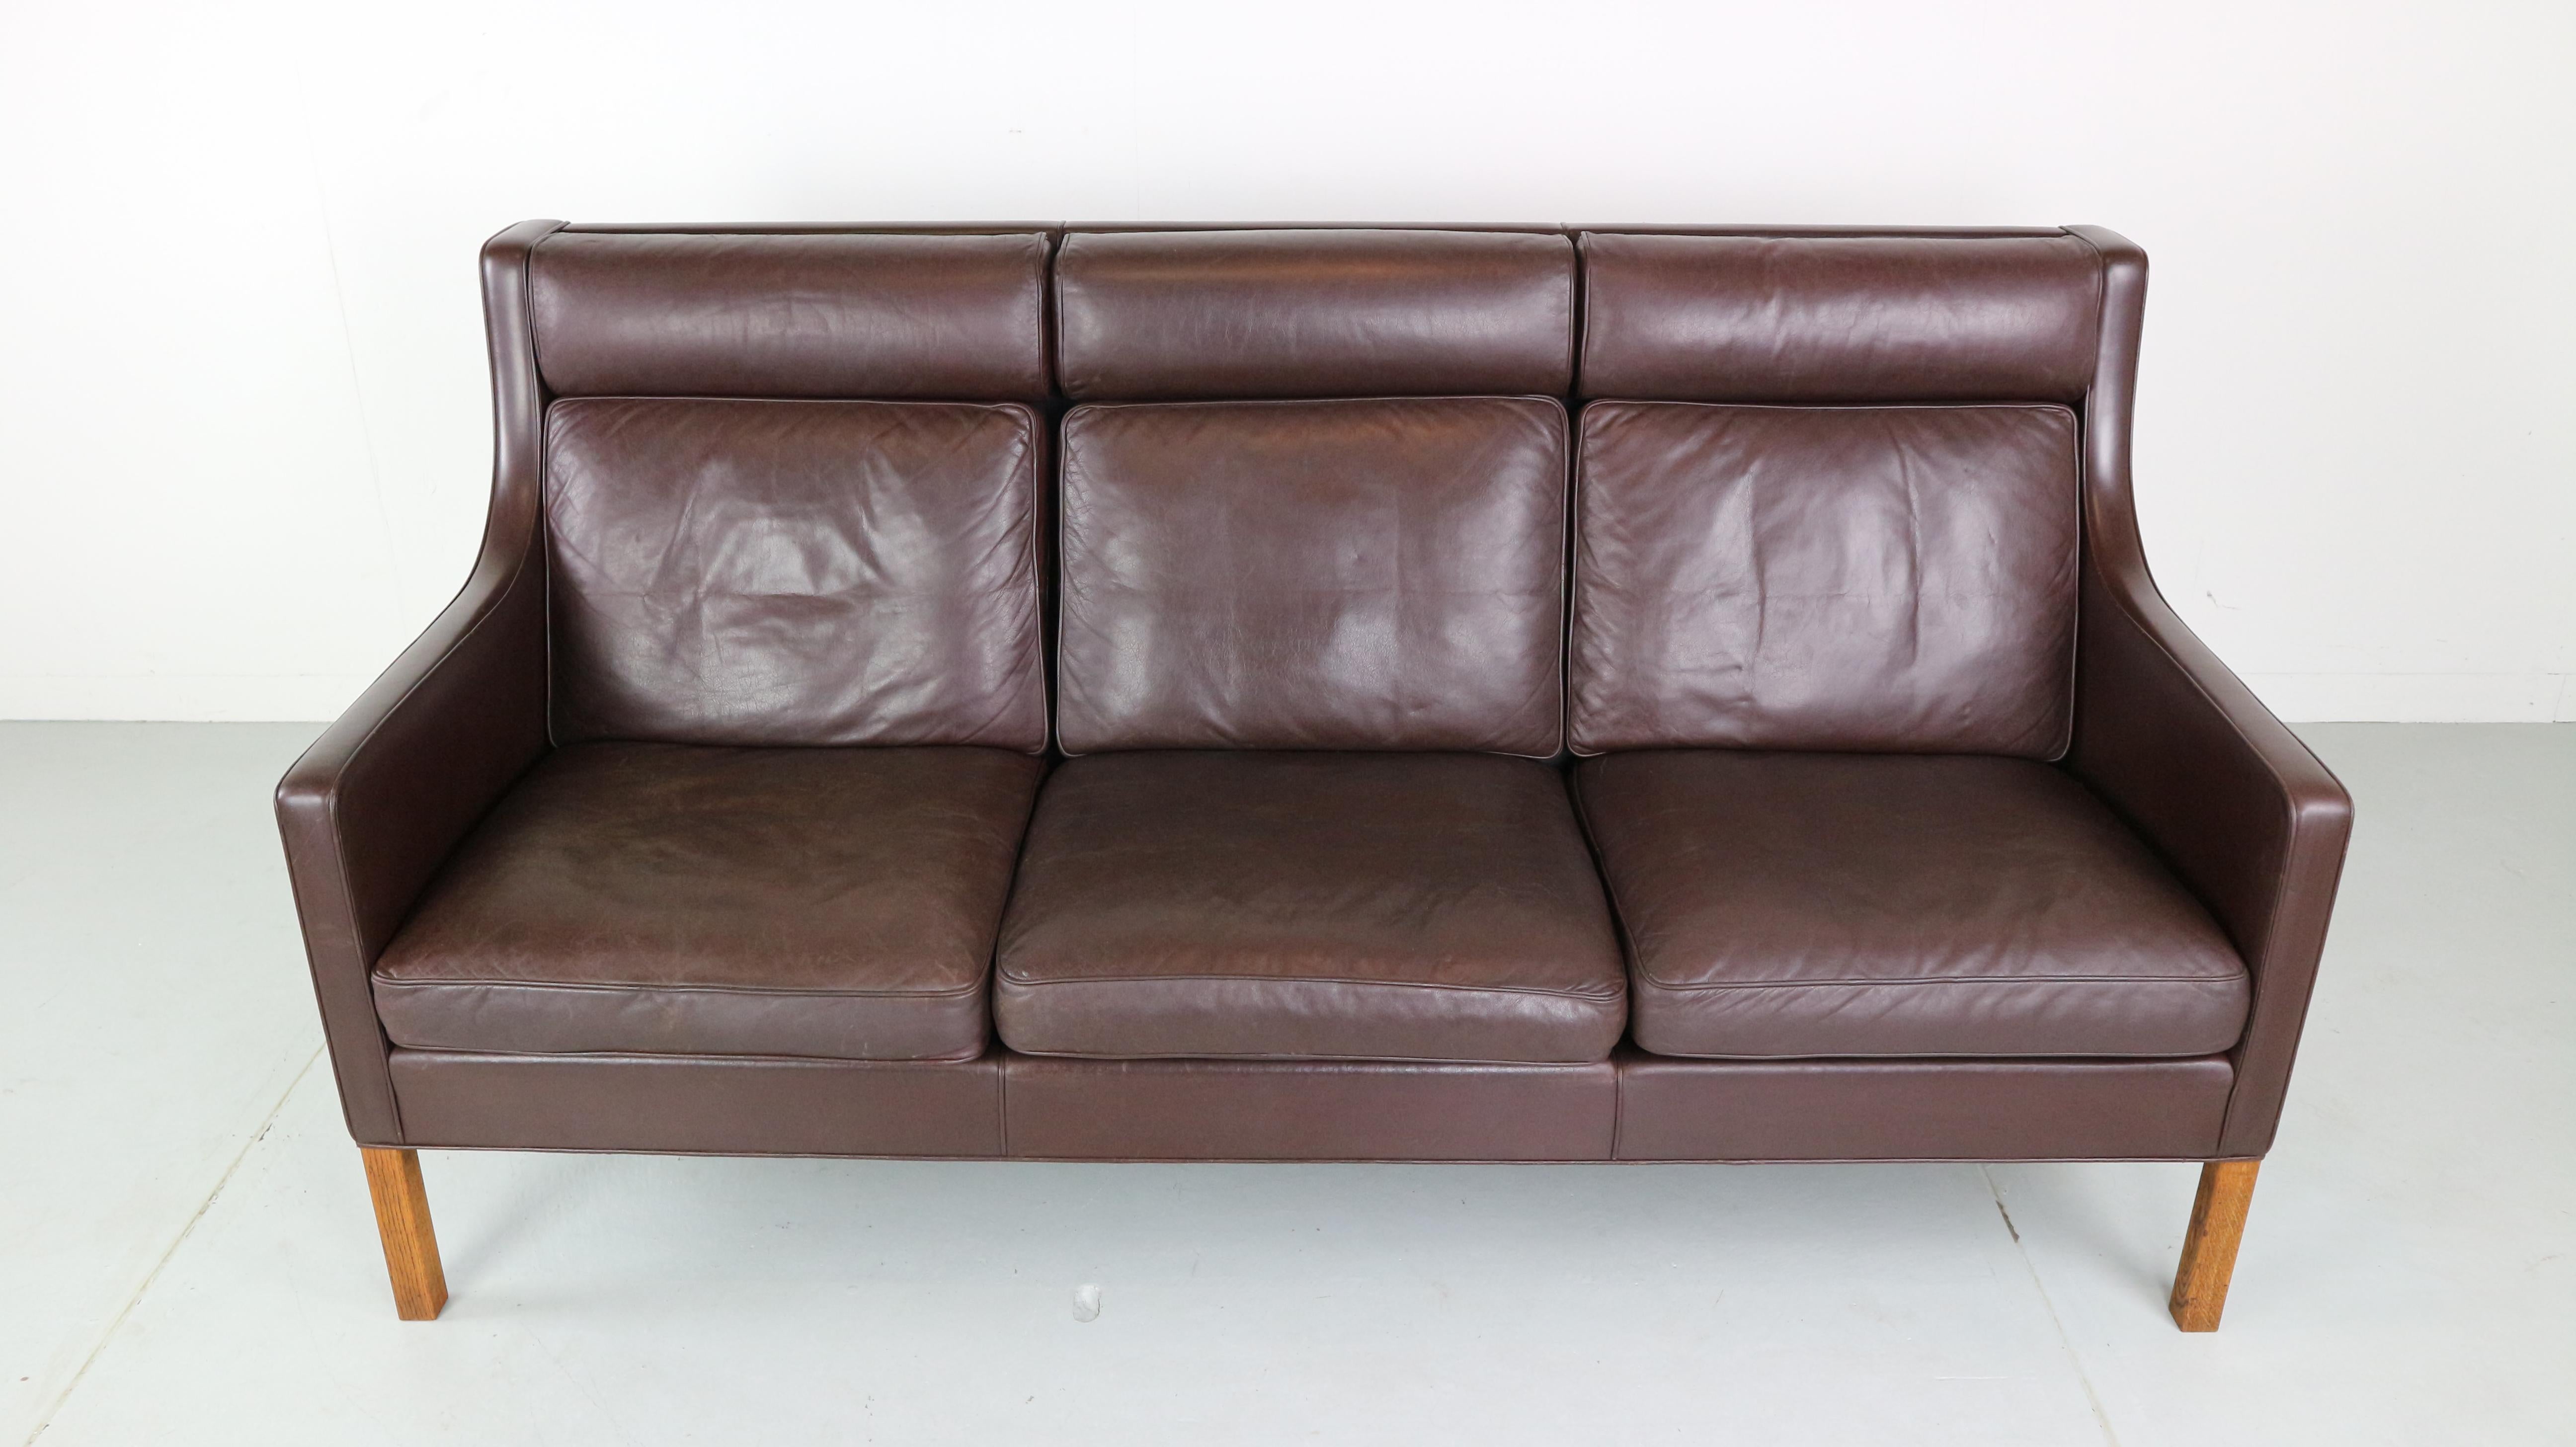 Mid-Century Modern Three-Seat Leather Sofa 2433 by Børge Mogensen for Fredericia Furniture